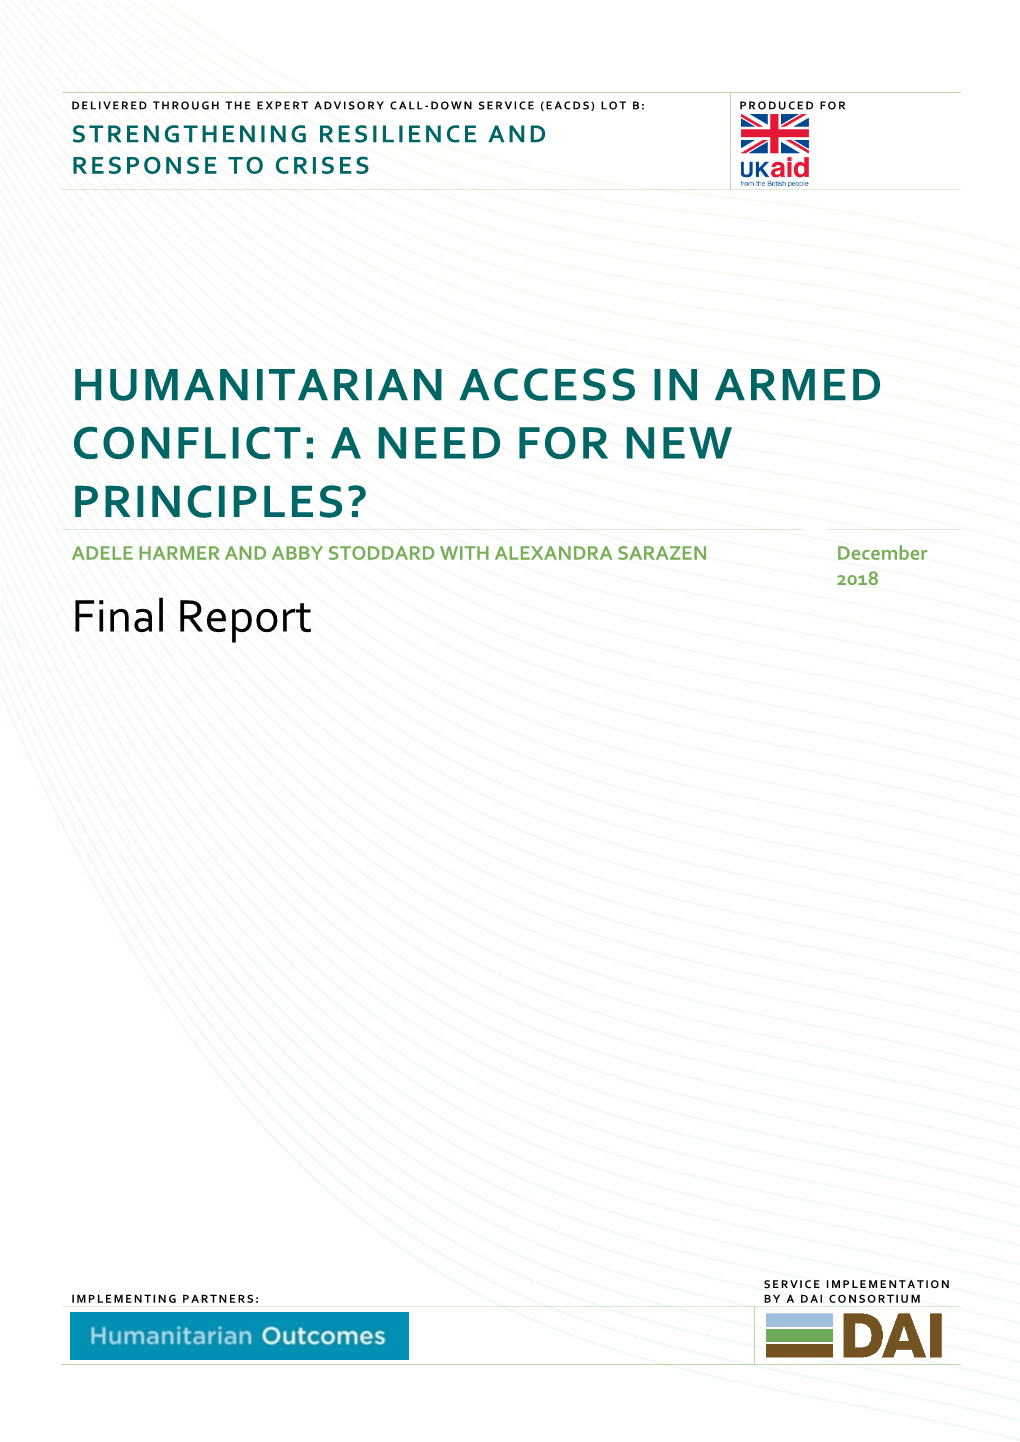 Humanitarian Access in Armed Conflict: a Need for New Principles?